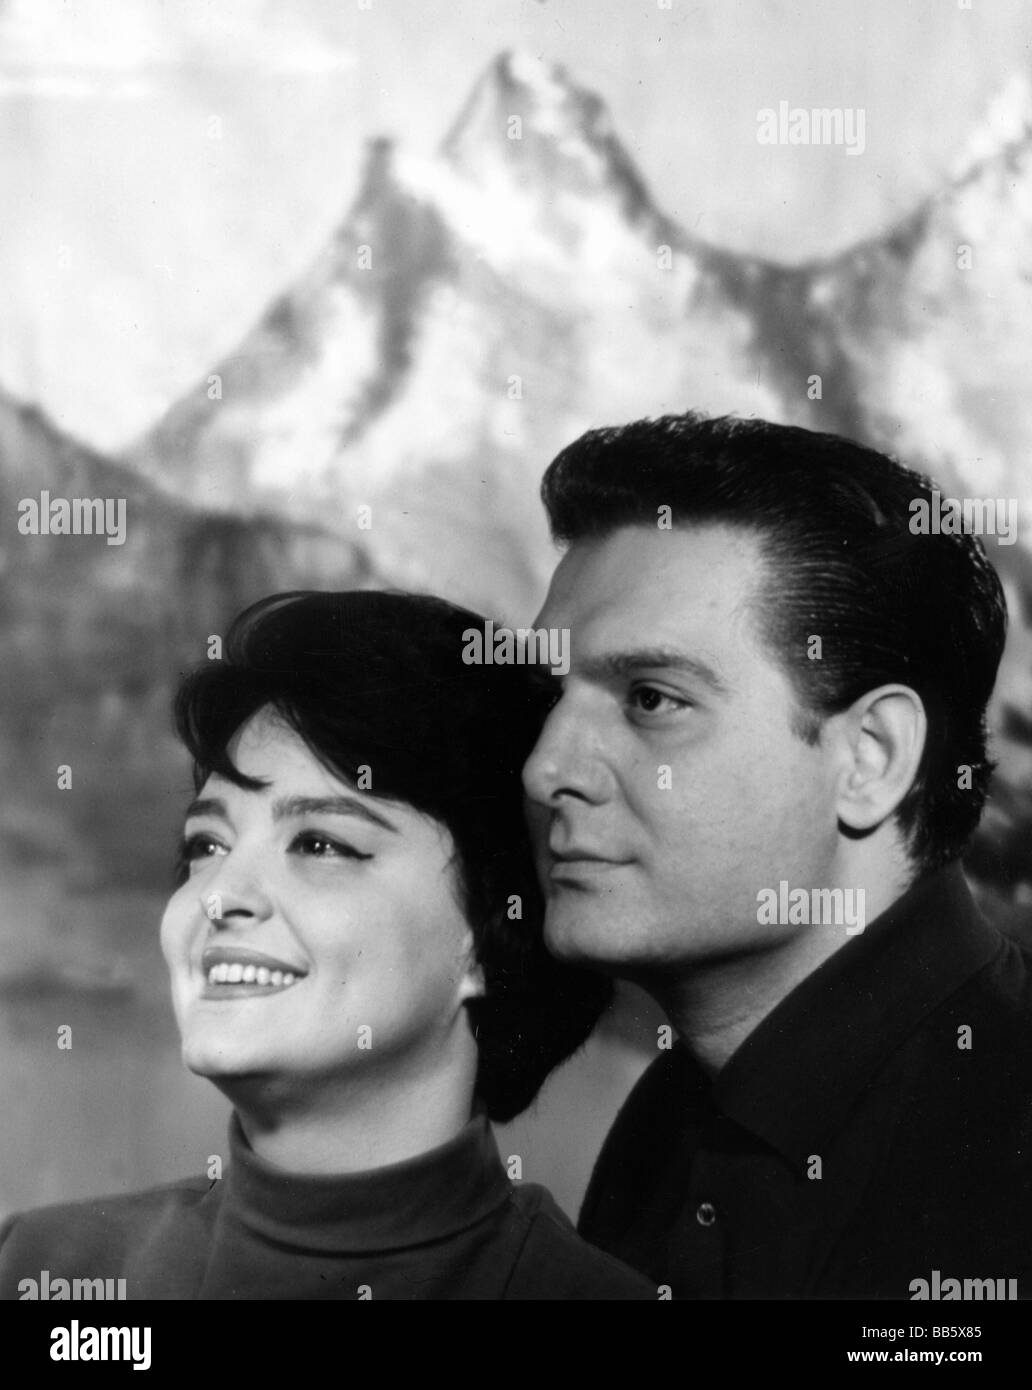 Makulis, Jimmy, 12.4.1935 - 28.10.2007, Greek singer and actor,  with Nina Zacha, photo call to the song 'Weites Land', 1961, Stock Photo